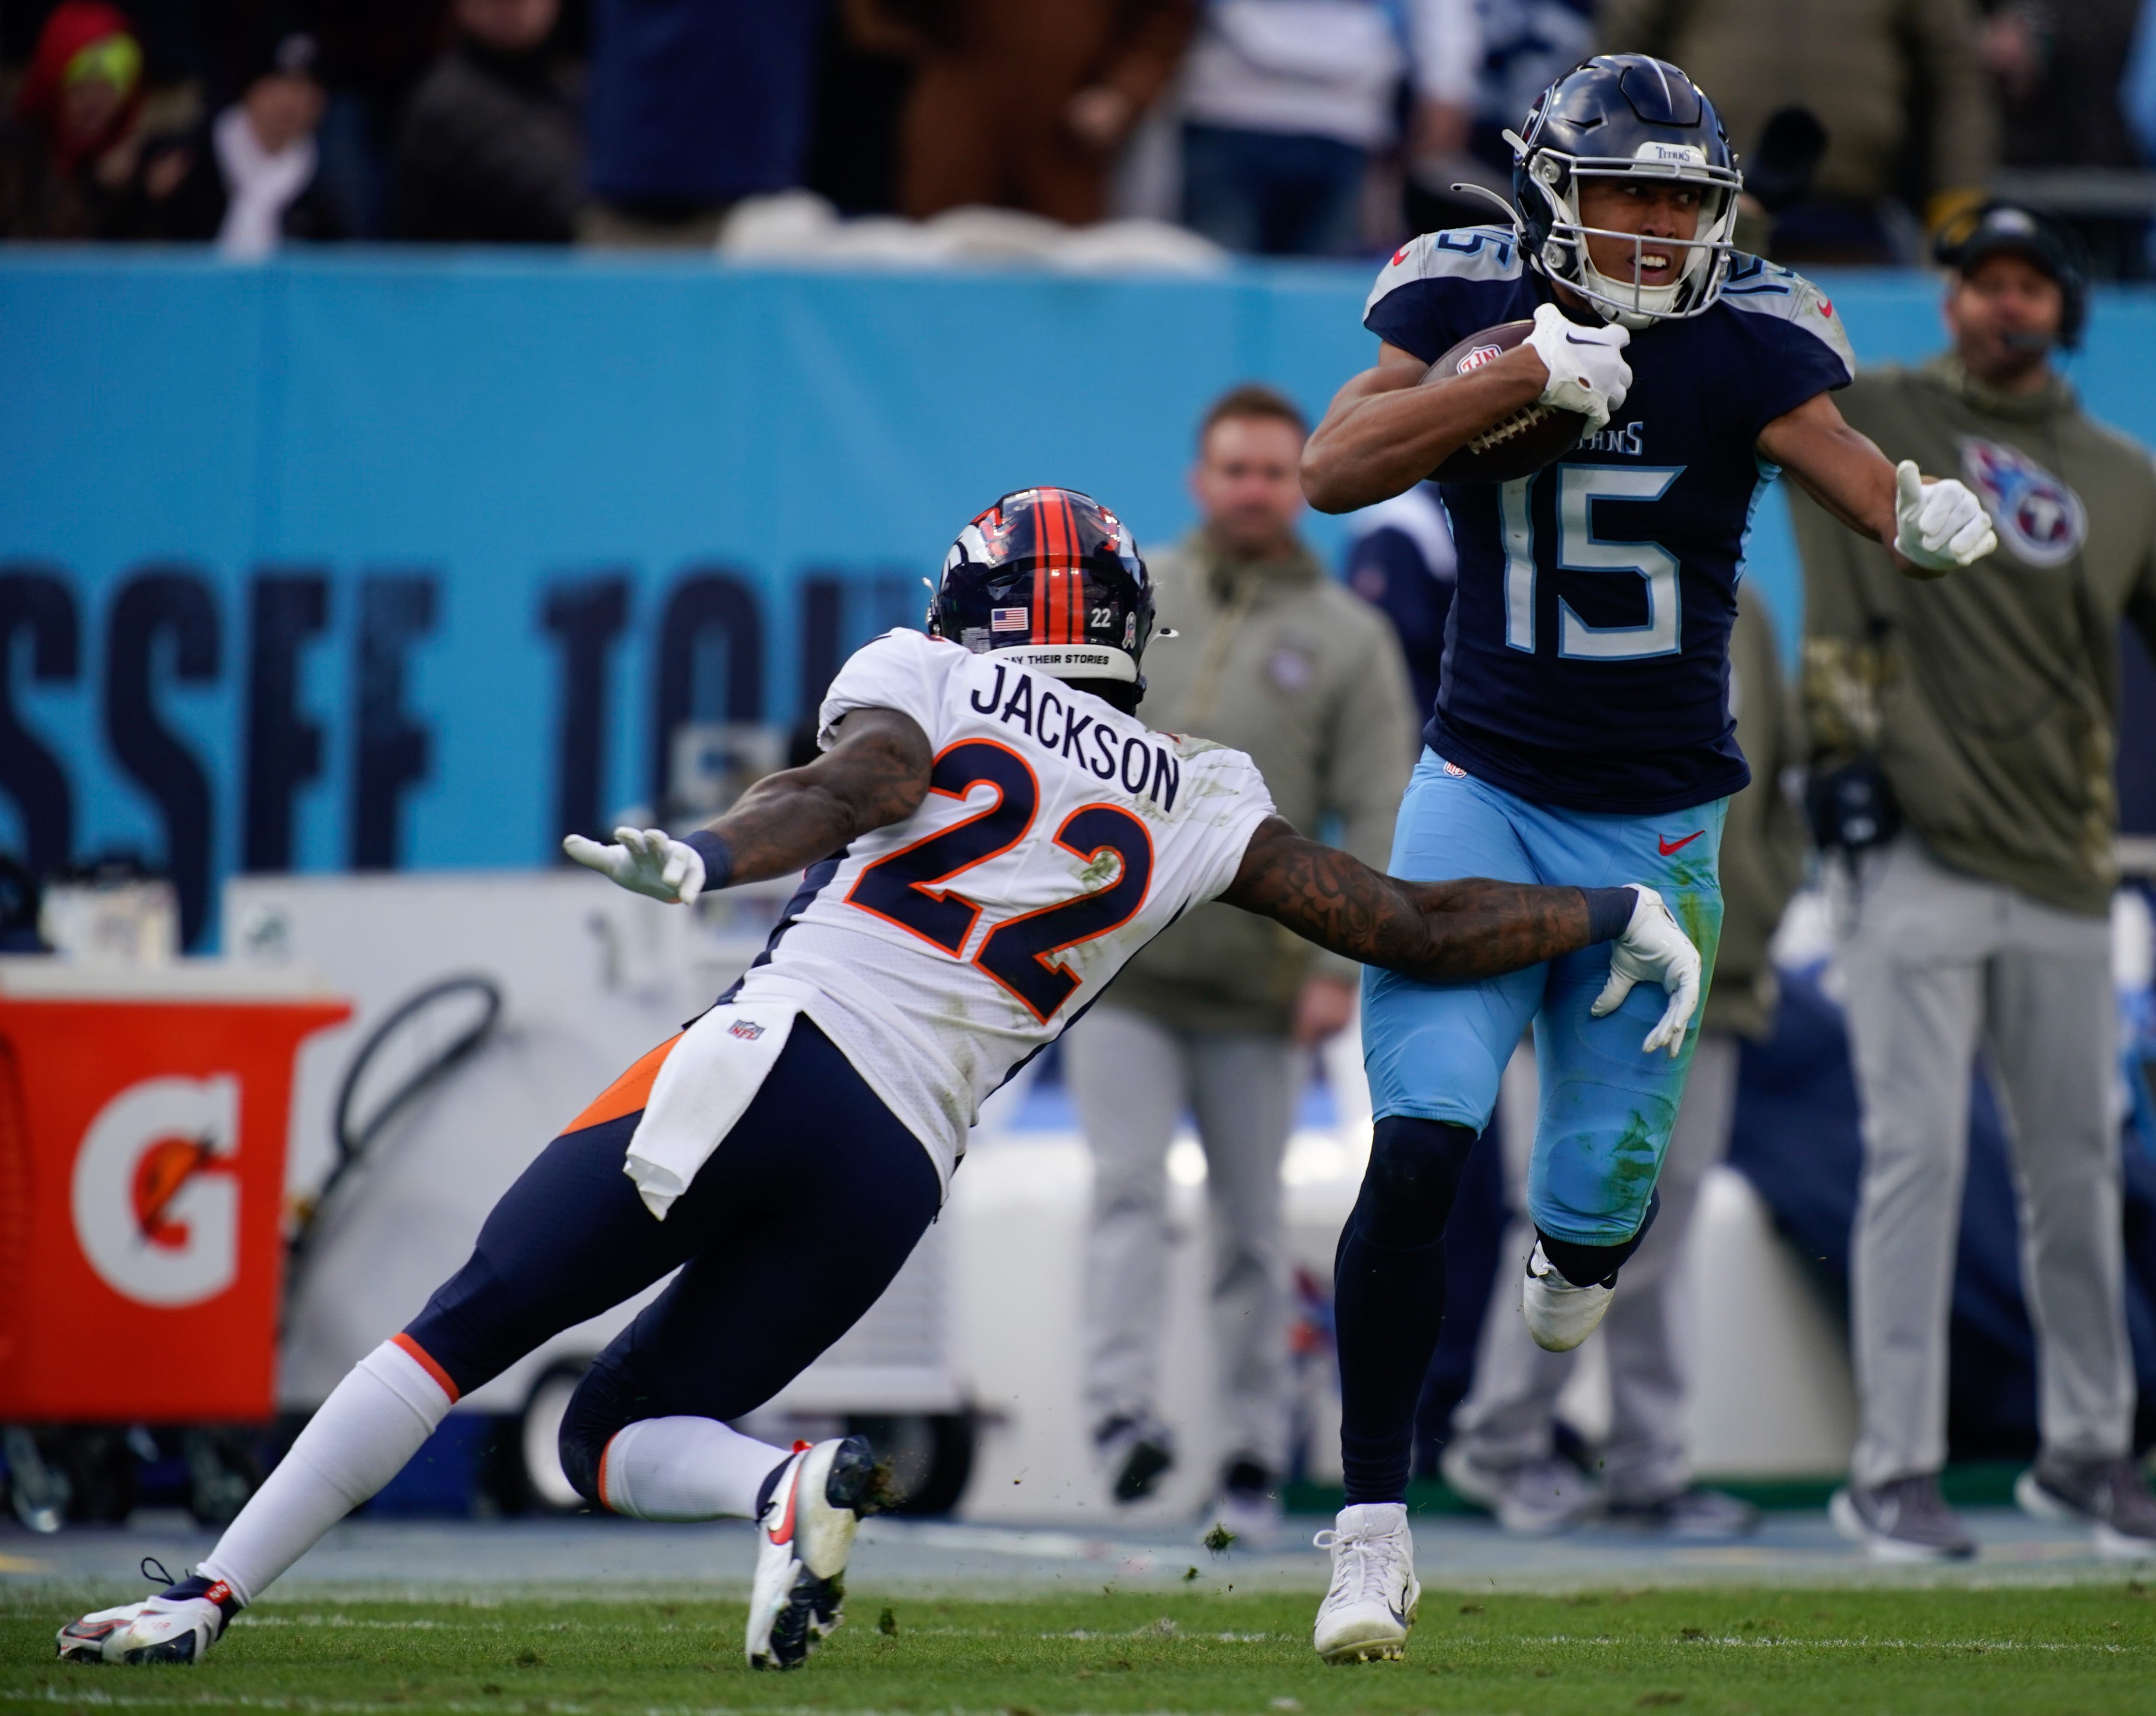 Tennessee Titans wide receiver Nick Westbrook-Ikhine (15) gets away from Denver Broncos safety Kareem Jackson (22) as he runs in a touch down during the third quarter at Nissan Stadium Sunday, Nov. 13, 2022, in Nashville, Tenn.